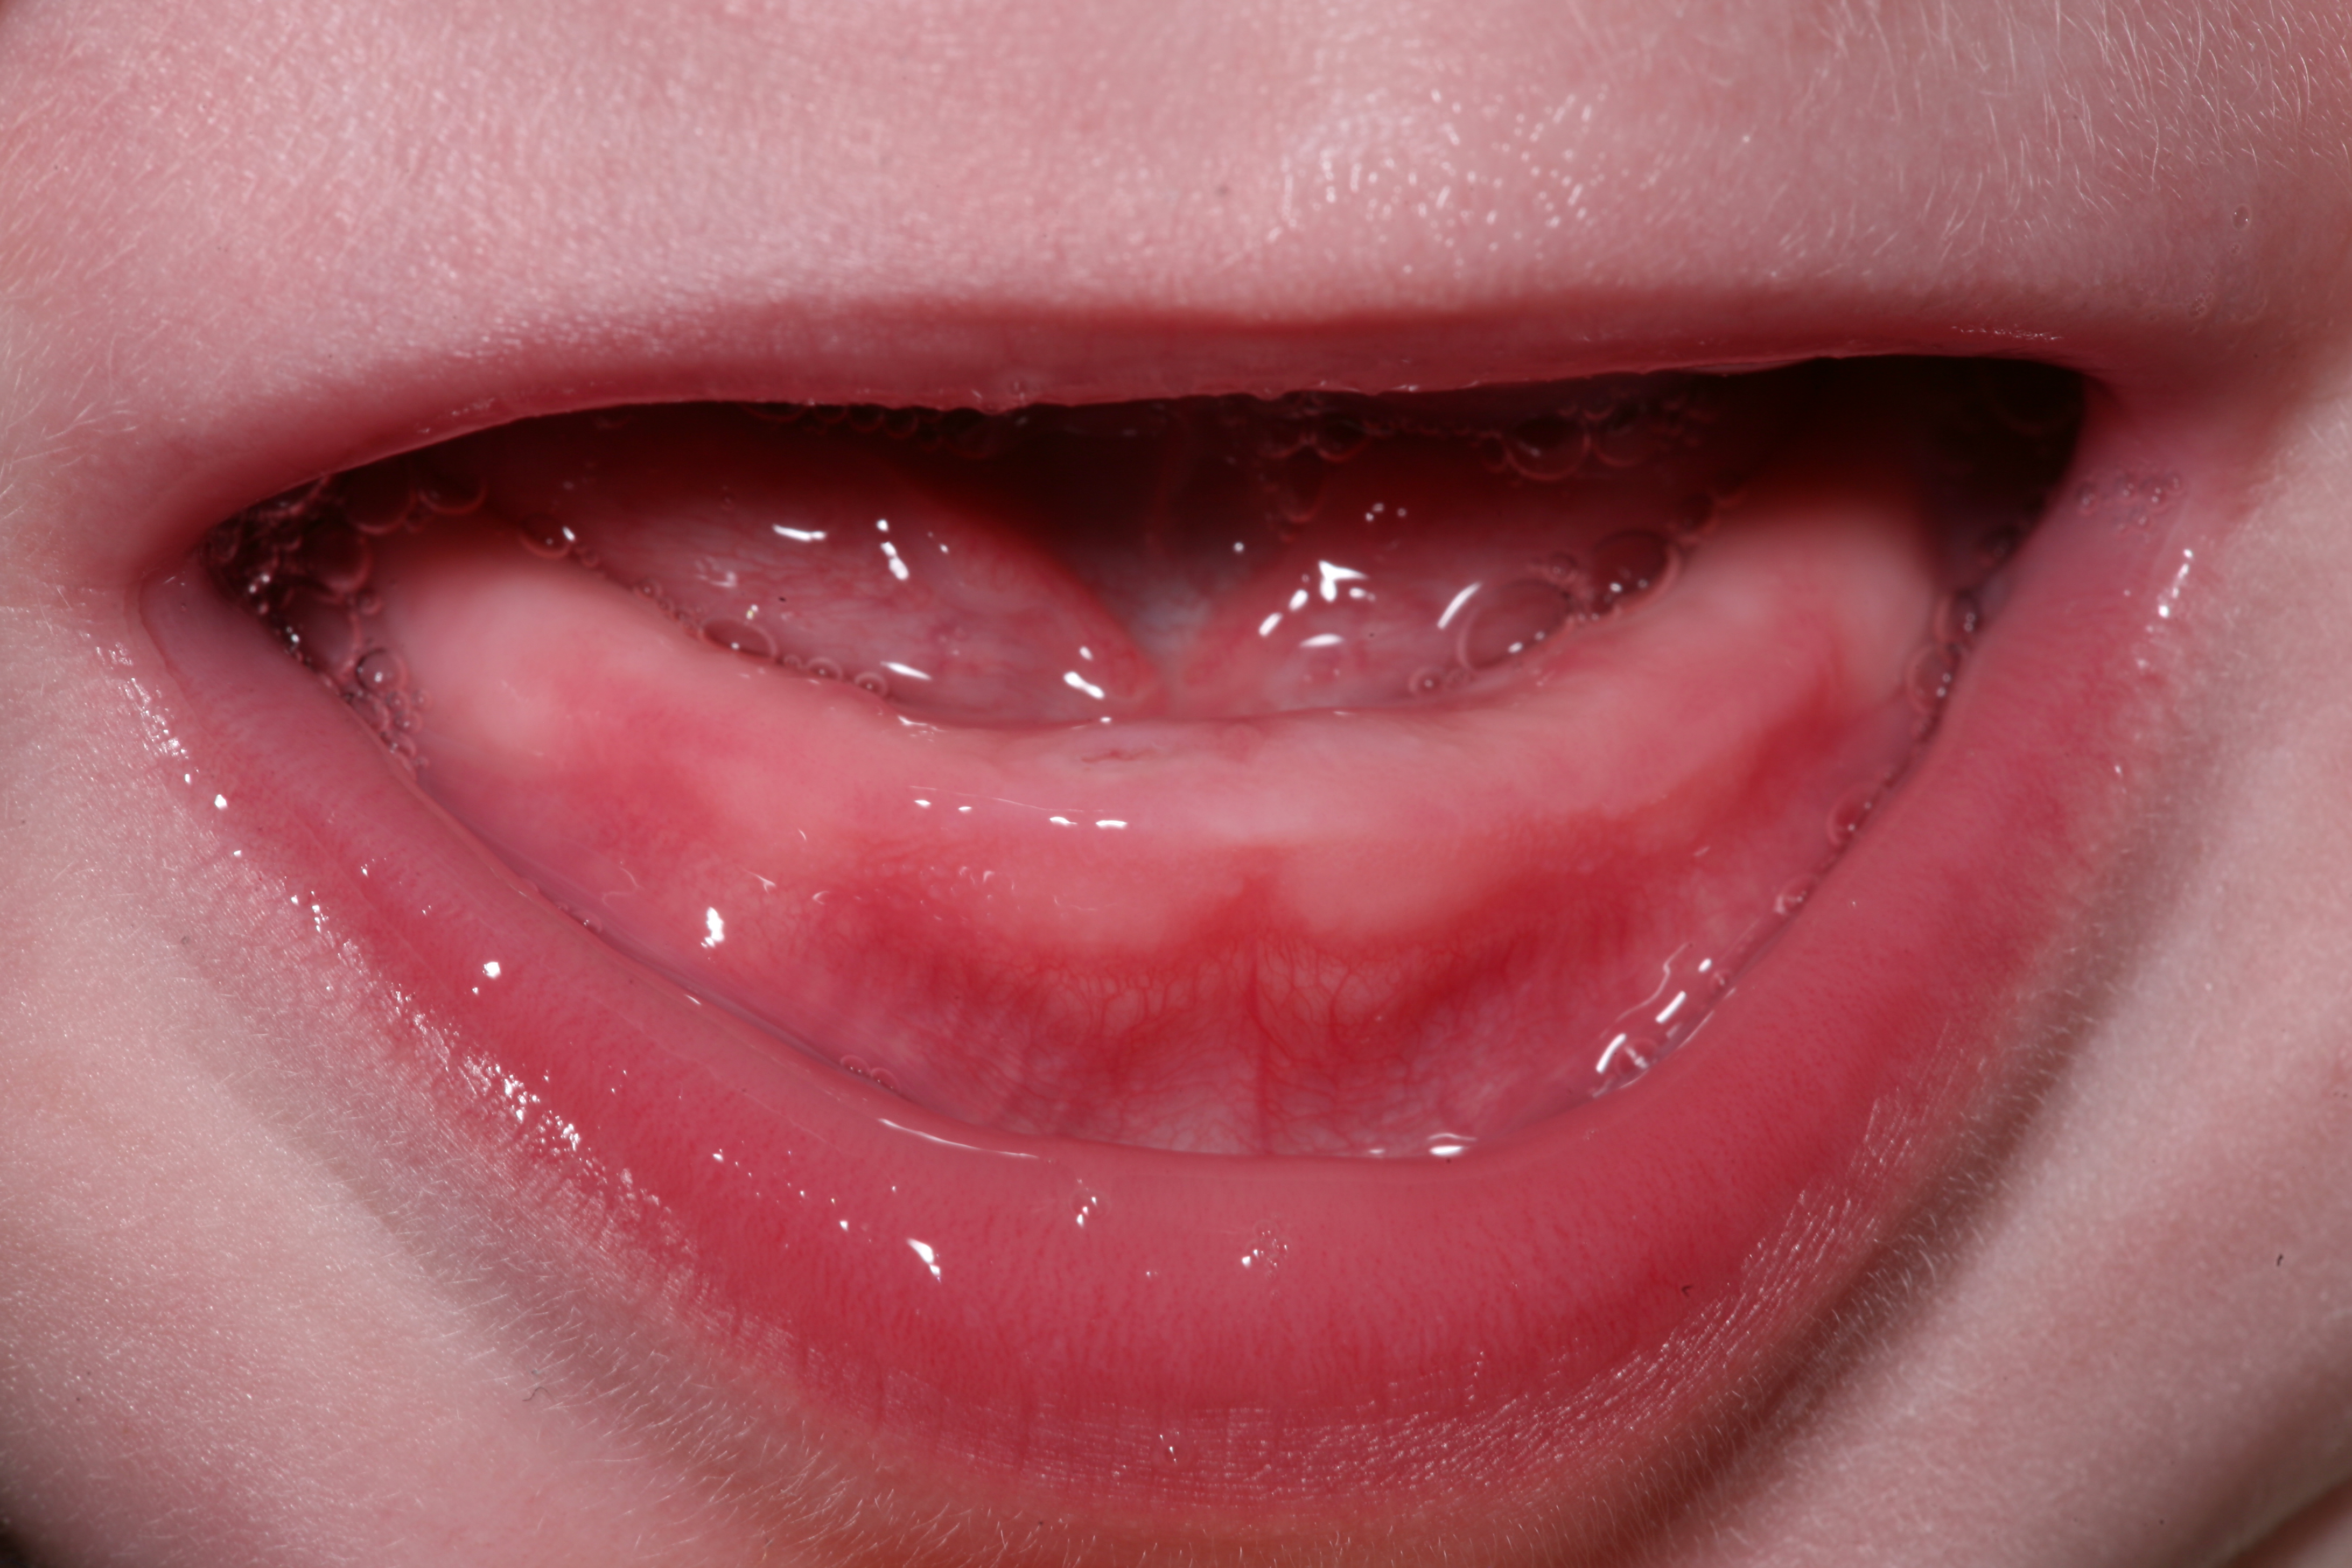 <p>First Sign of Right Incisor Breakthrough. Lower right incisor breaking through the oral mucosa of a teething baby.</p>